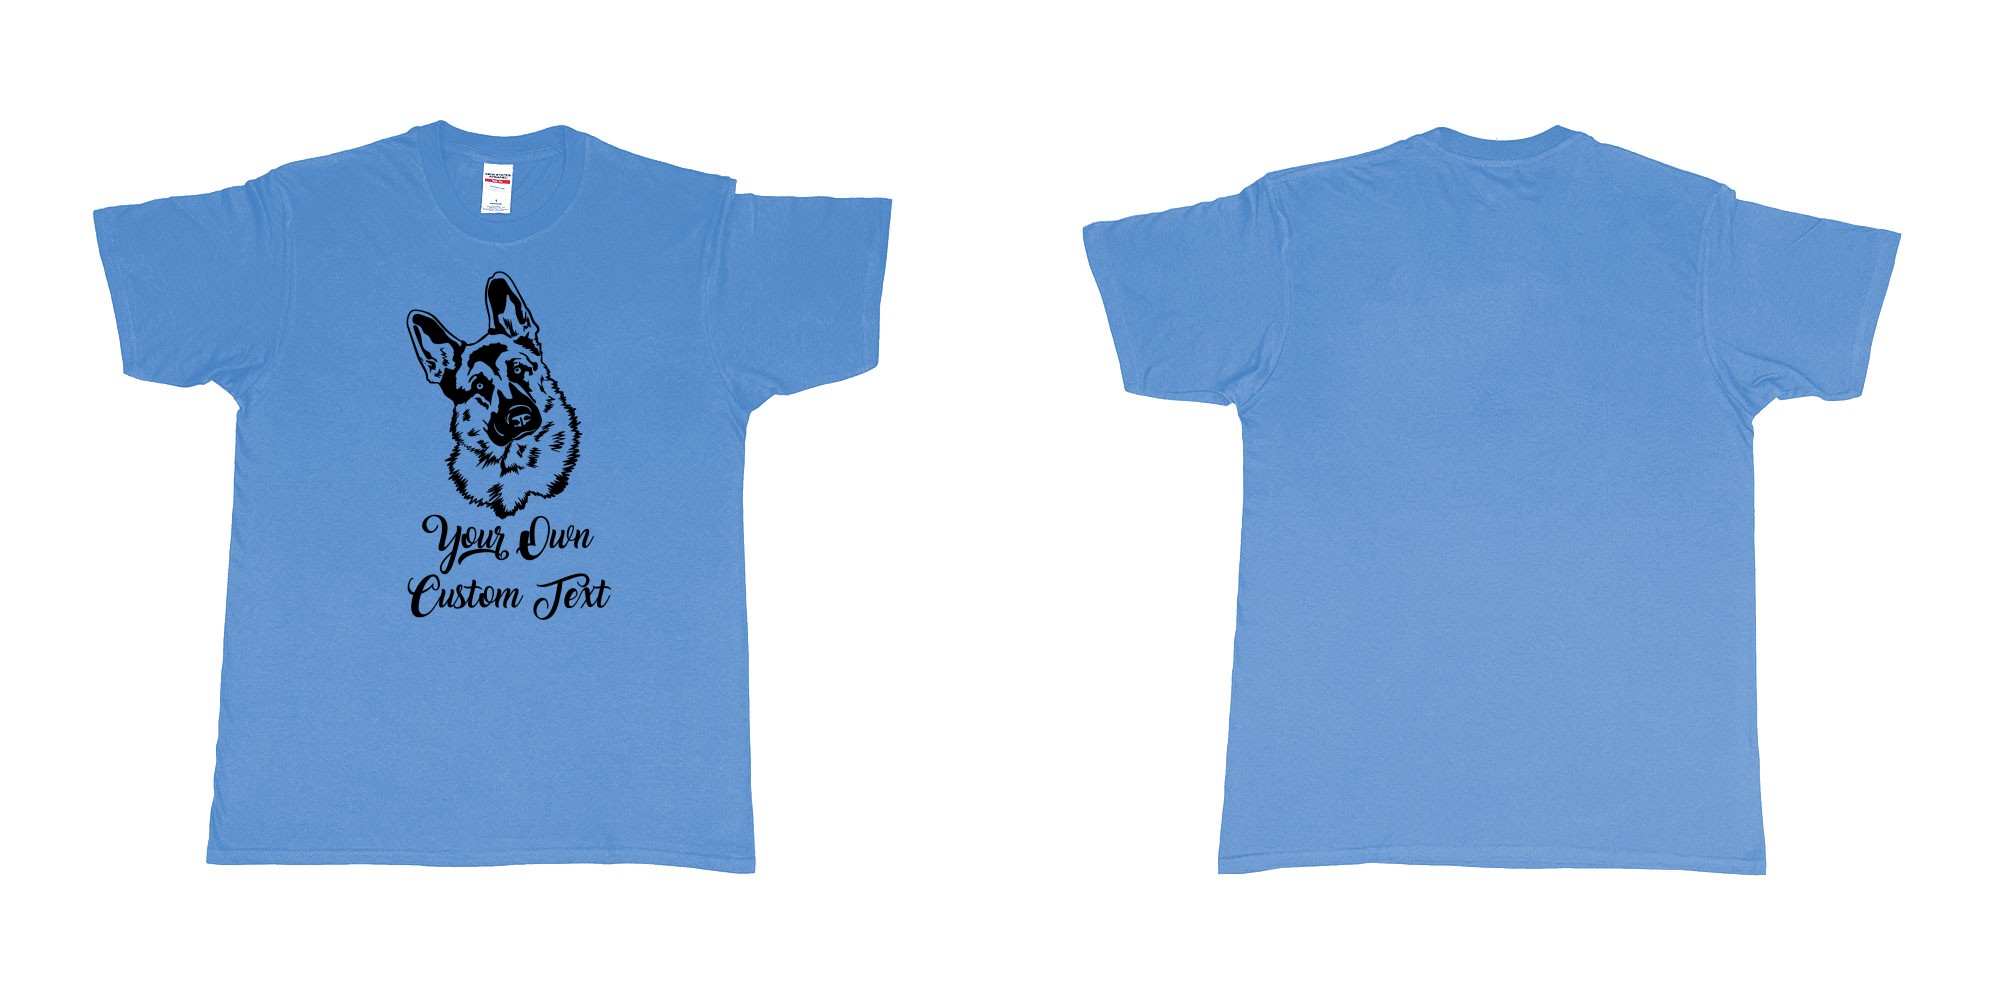 Custom tshirt design zack german shepherd tilts its head your own custom text in fabric color carolina-blue choice your own text made in Bali by The Pirate Way